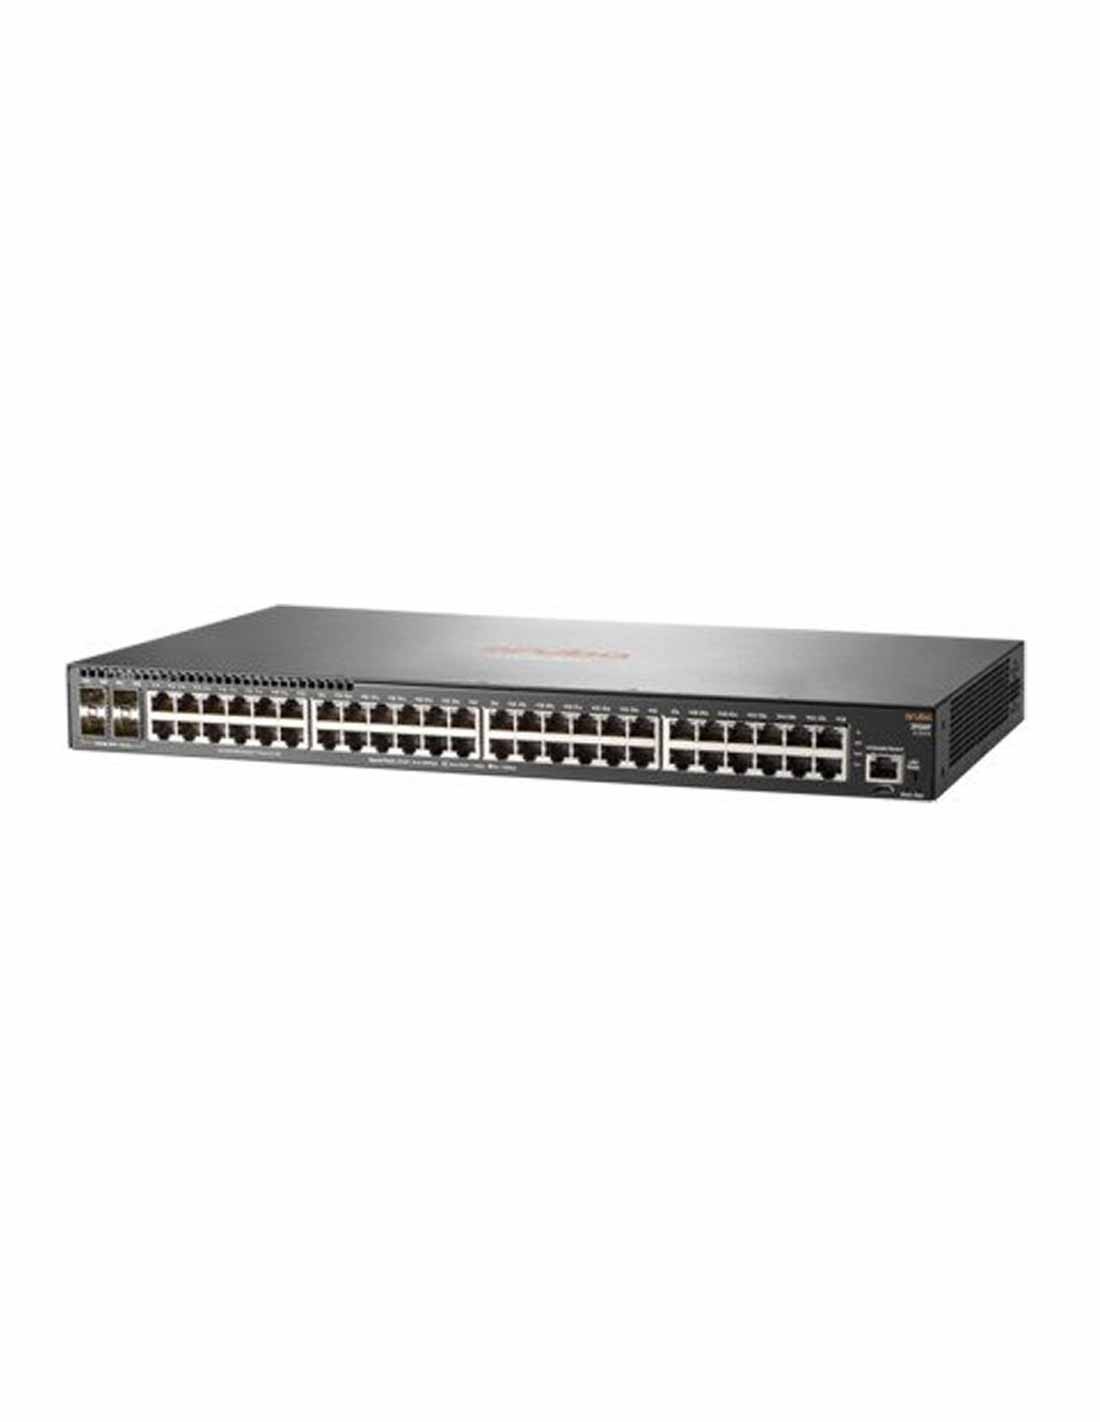 Aruba 2930F 48G 4SFP+ Switch JL254A at a cheap price and free delivery in Dubai